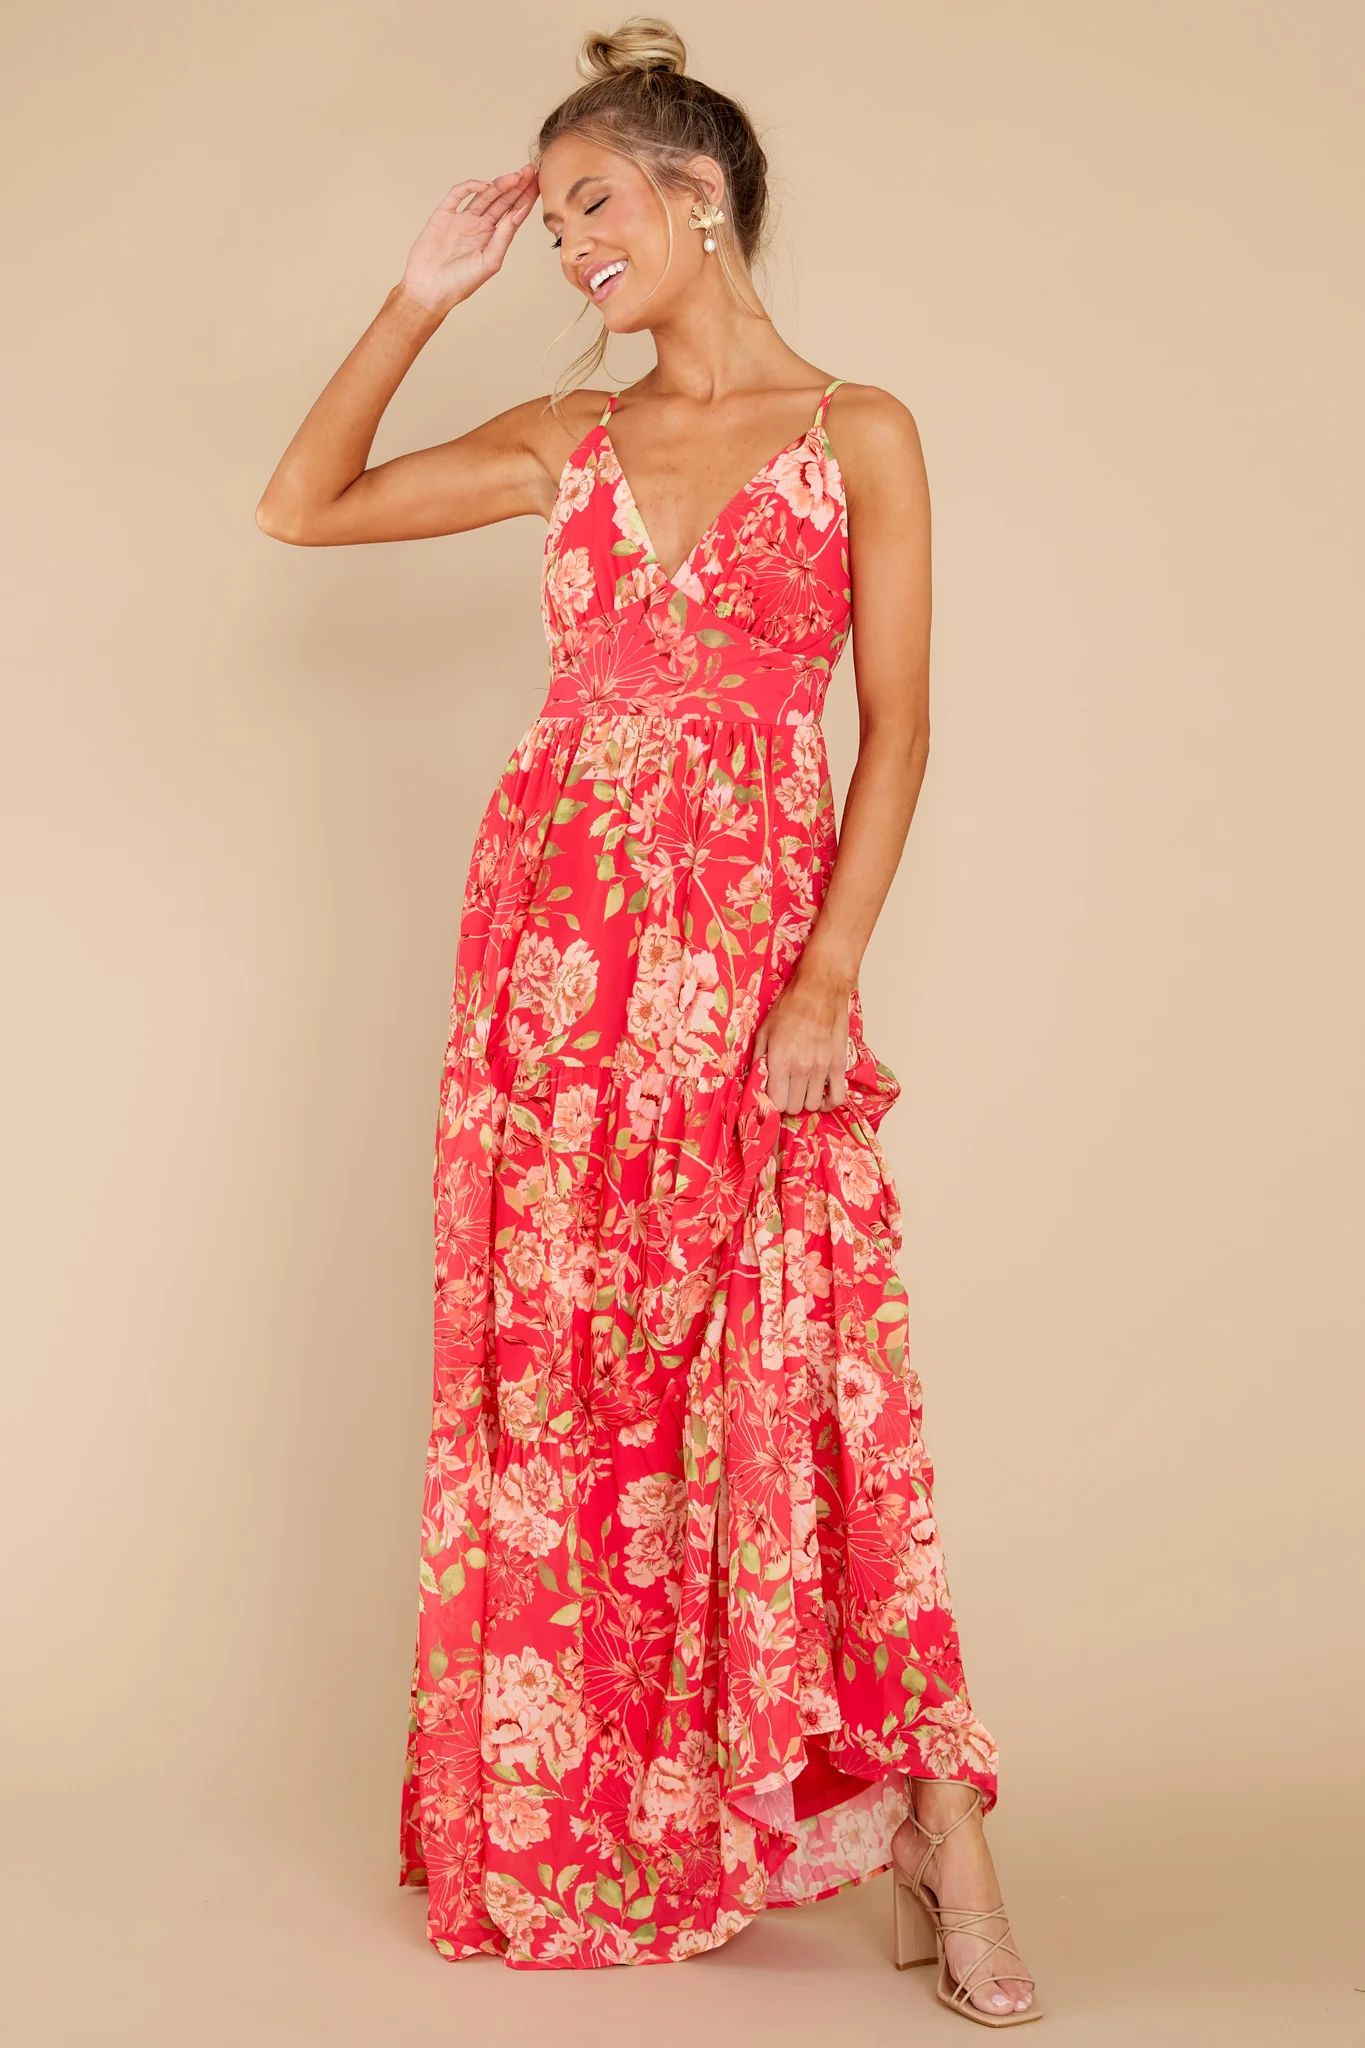 Watching For You Fuchsia Floral Print Maxi Dress | Red Dress 